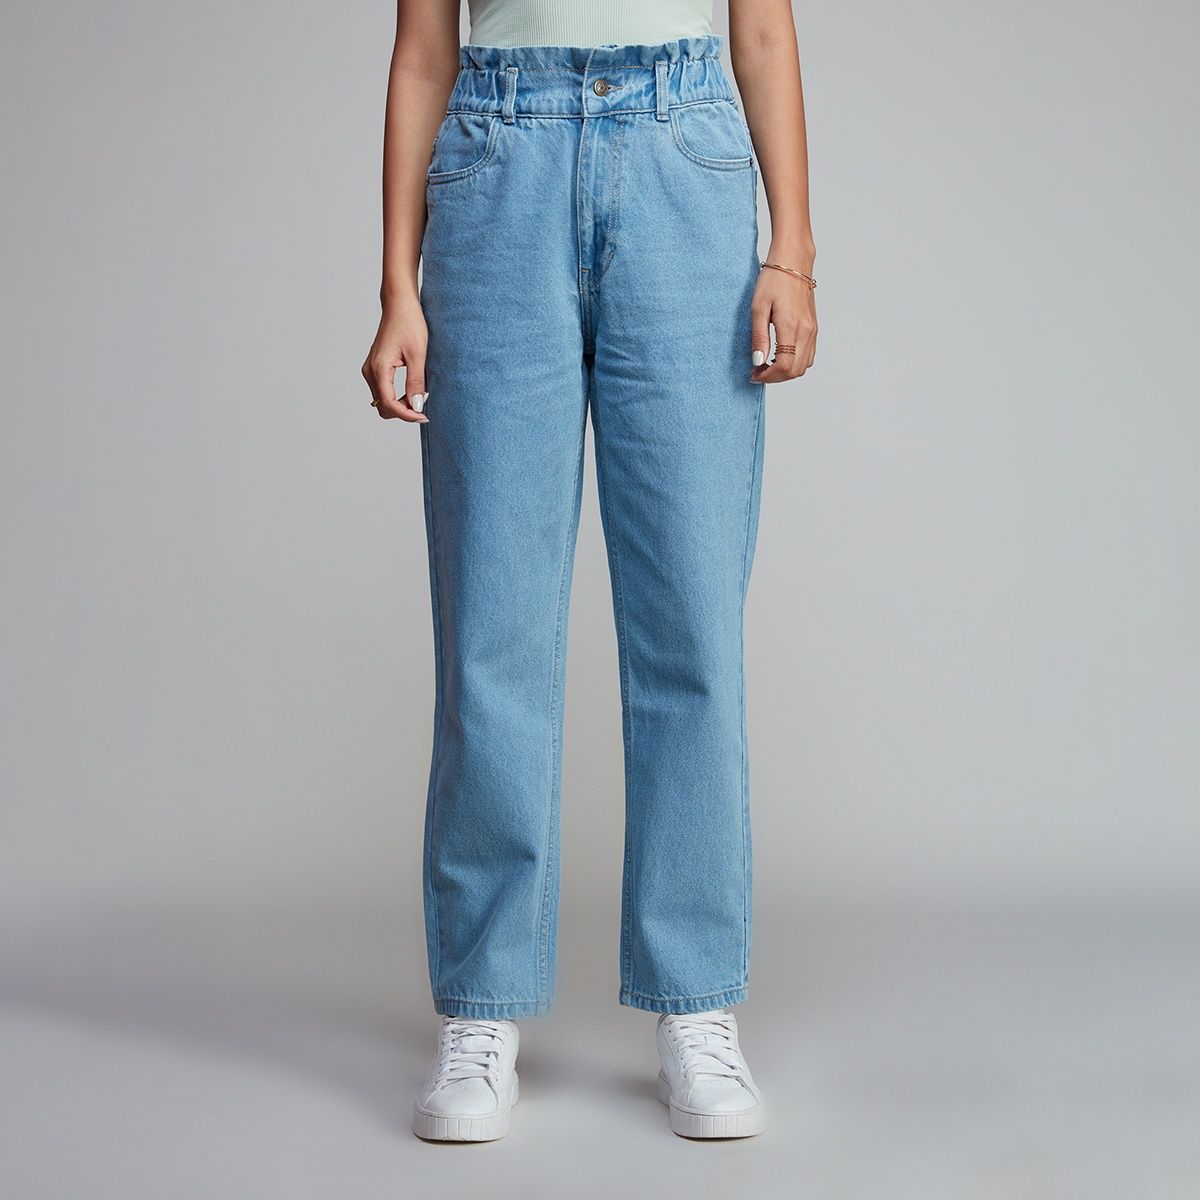 Best HighWaisted Jeans  Forbes Vetted